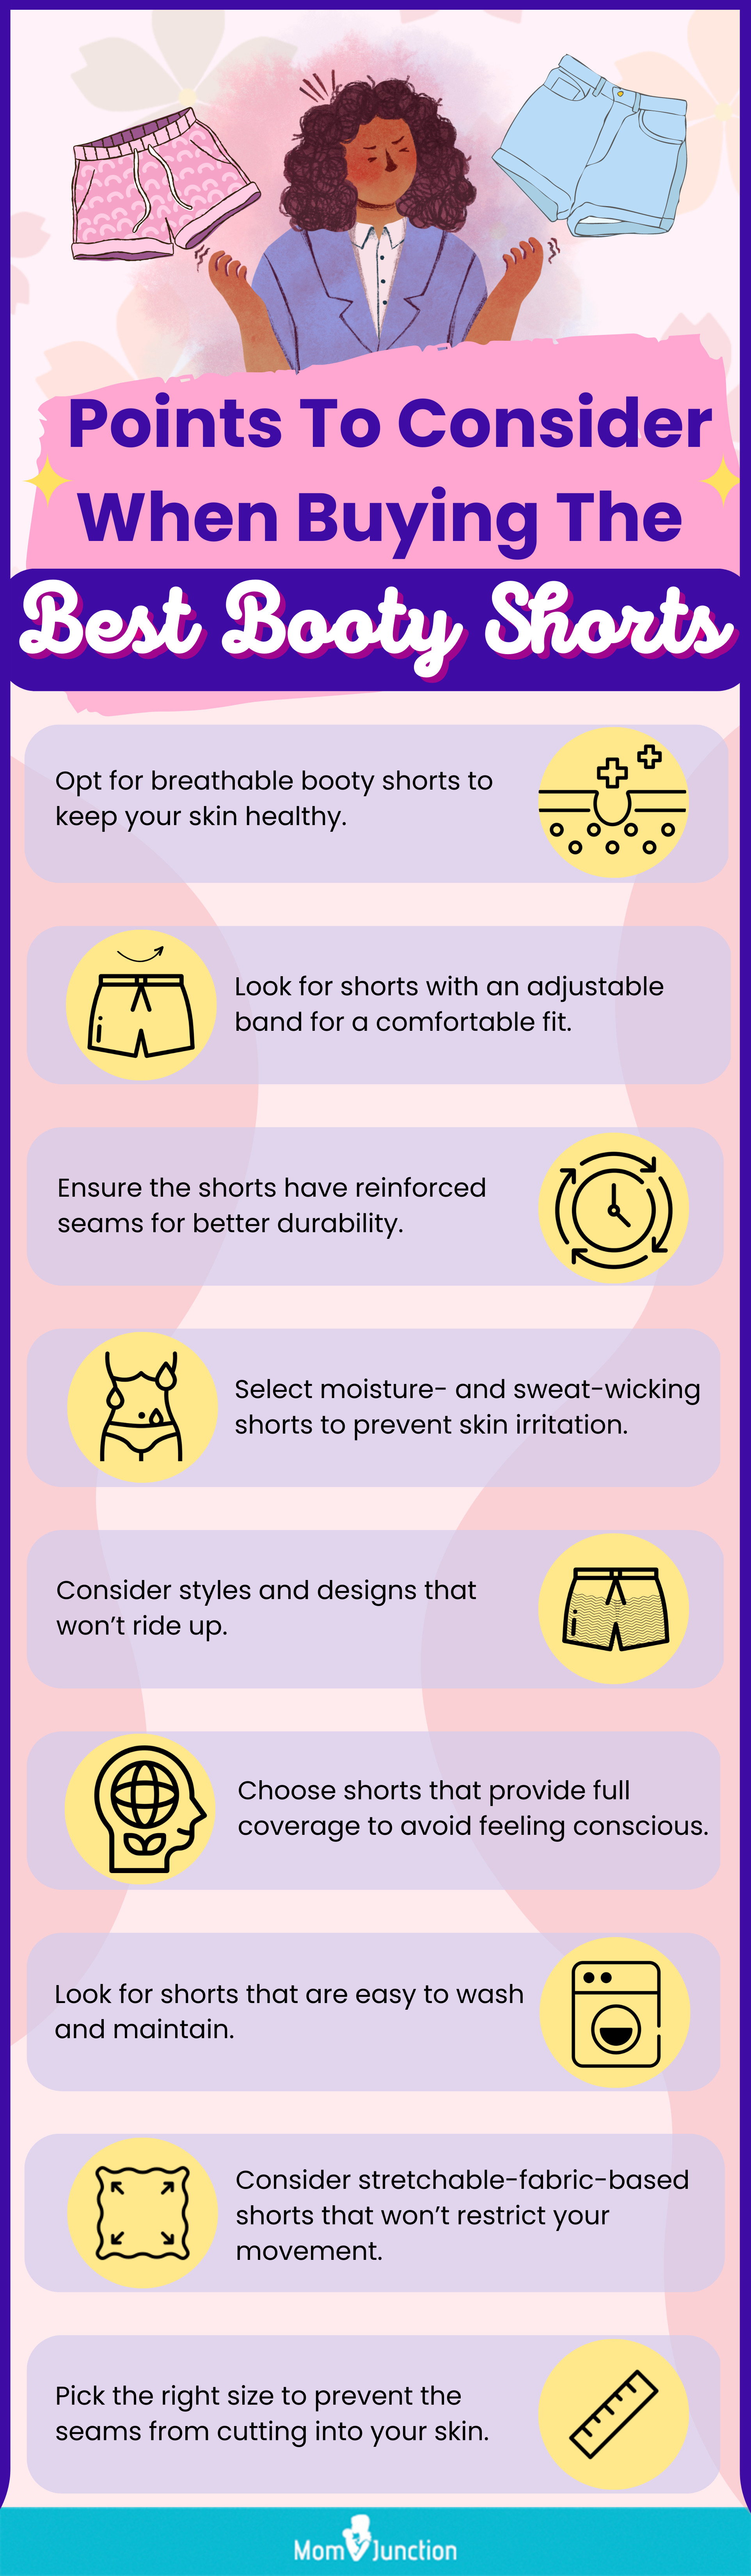 Points To Consider When Buying The Best Booty Shorts (infographic)